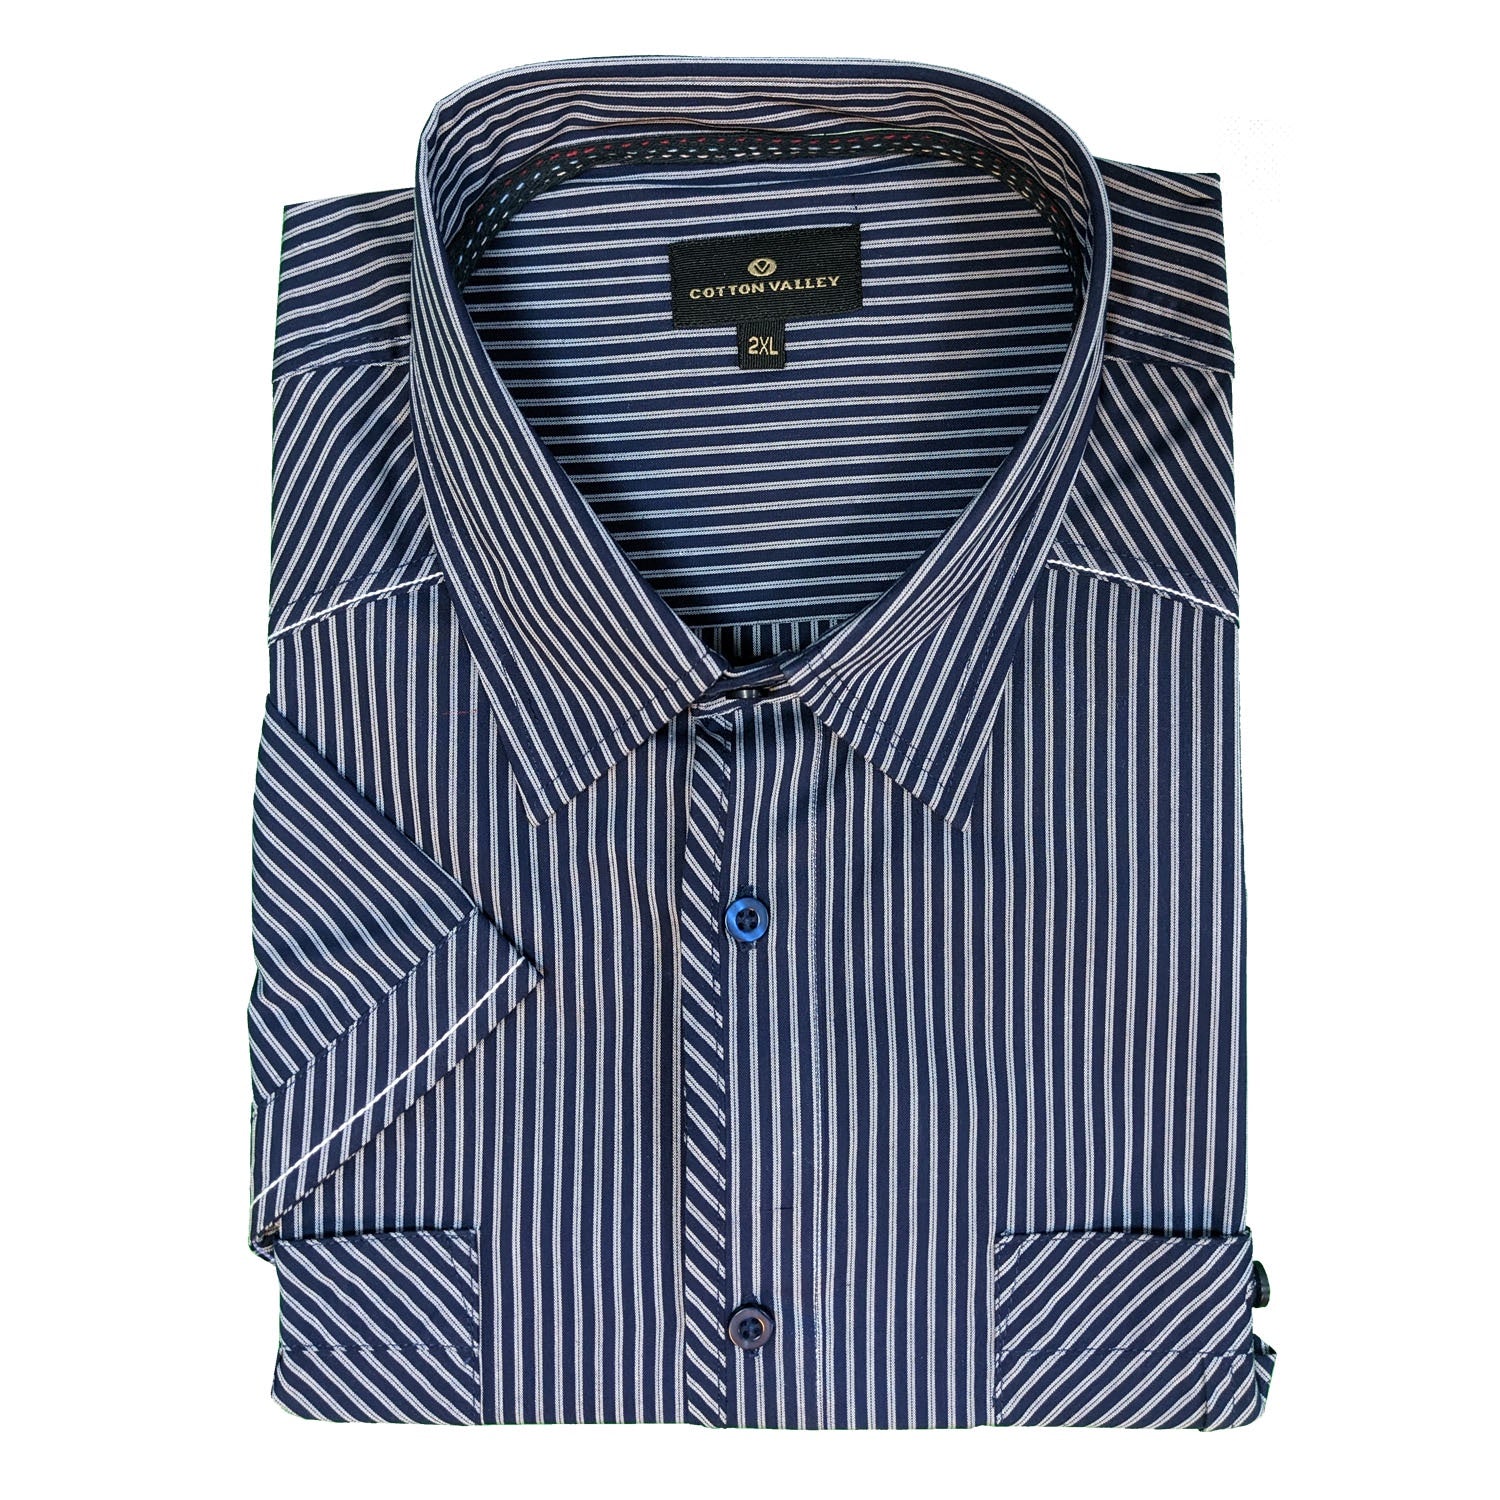 Cotton Valley S/S Shirt - 14152 - Navy 1